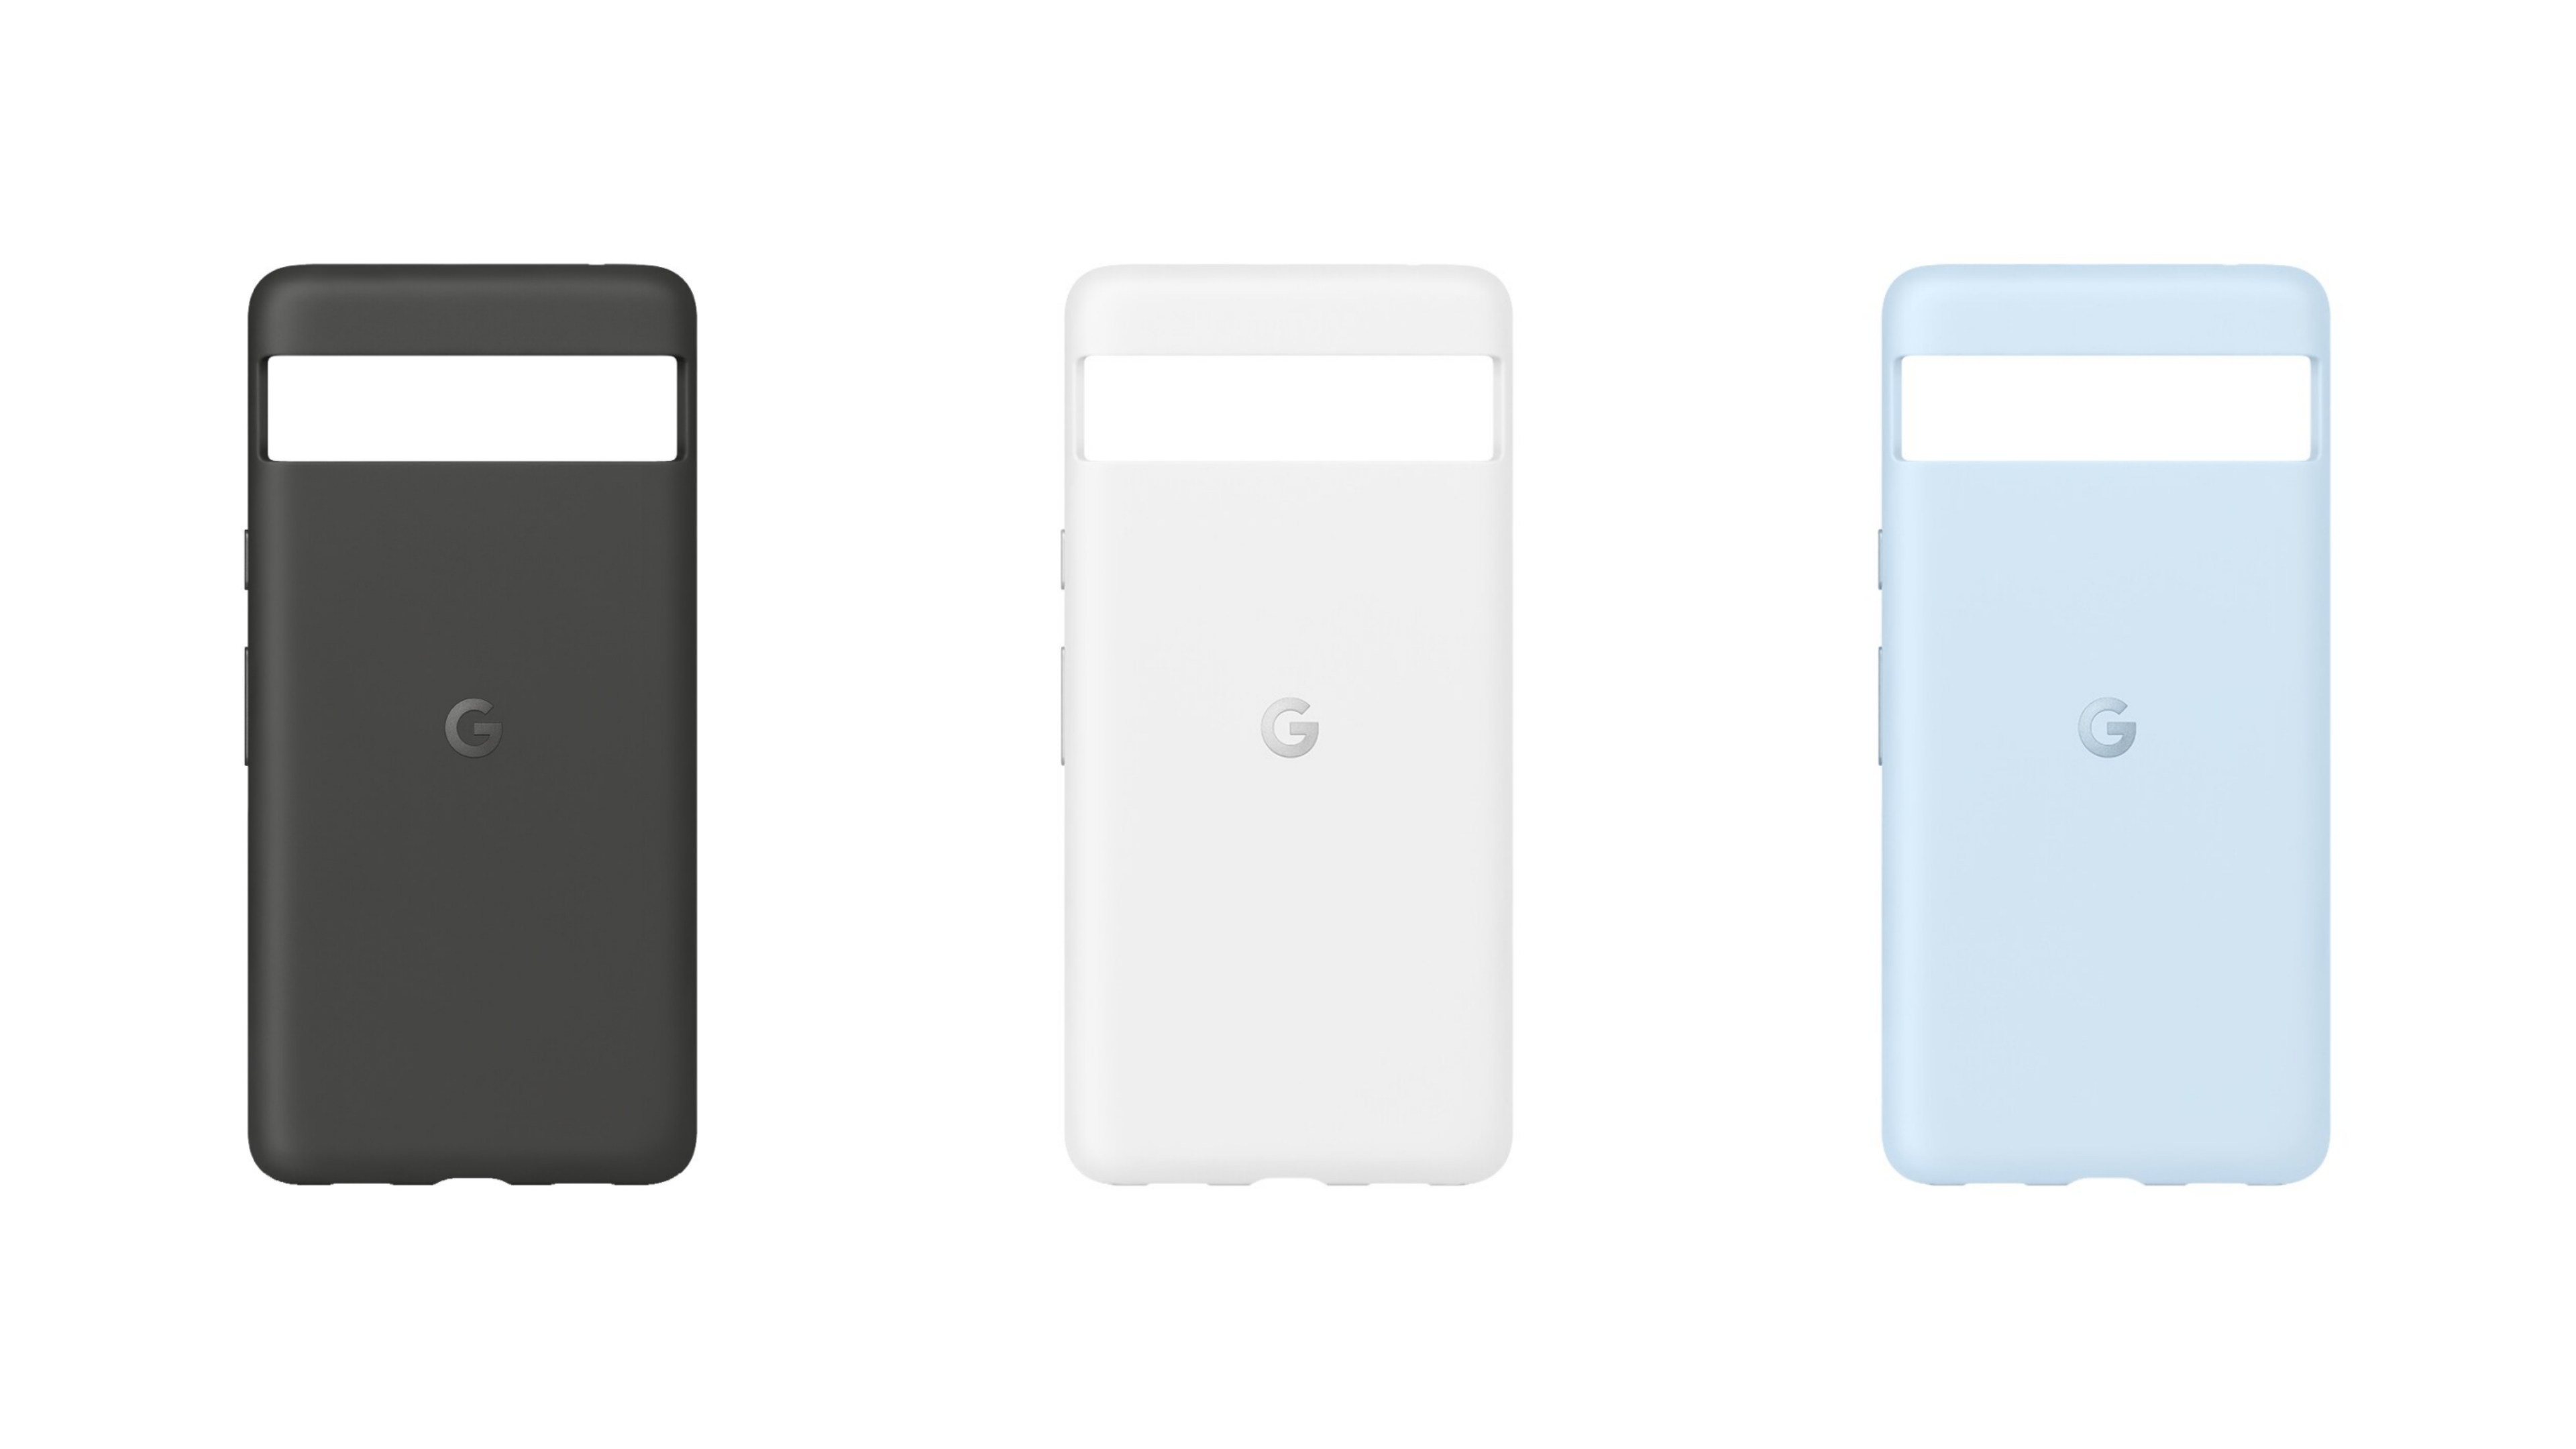 Google Pixel 7a cases in carbon gray, amaranth white, and arctic blue